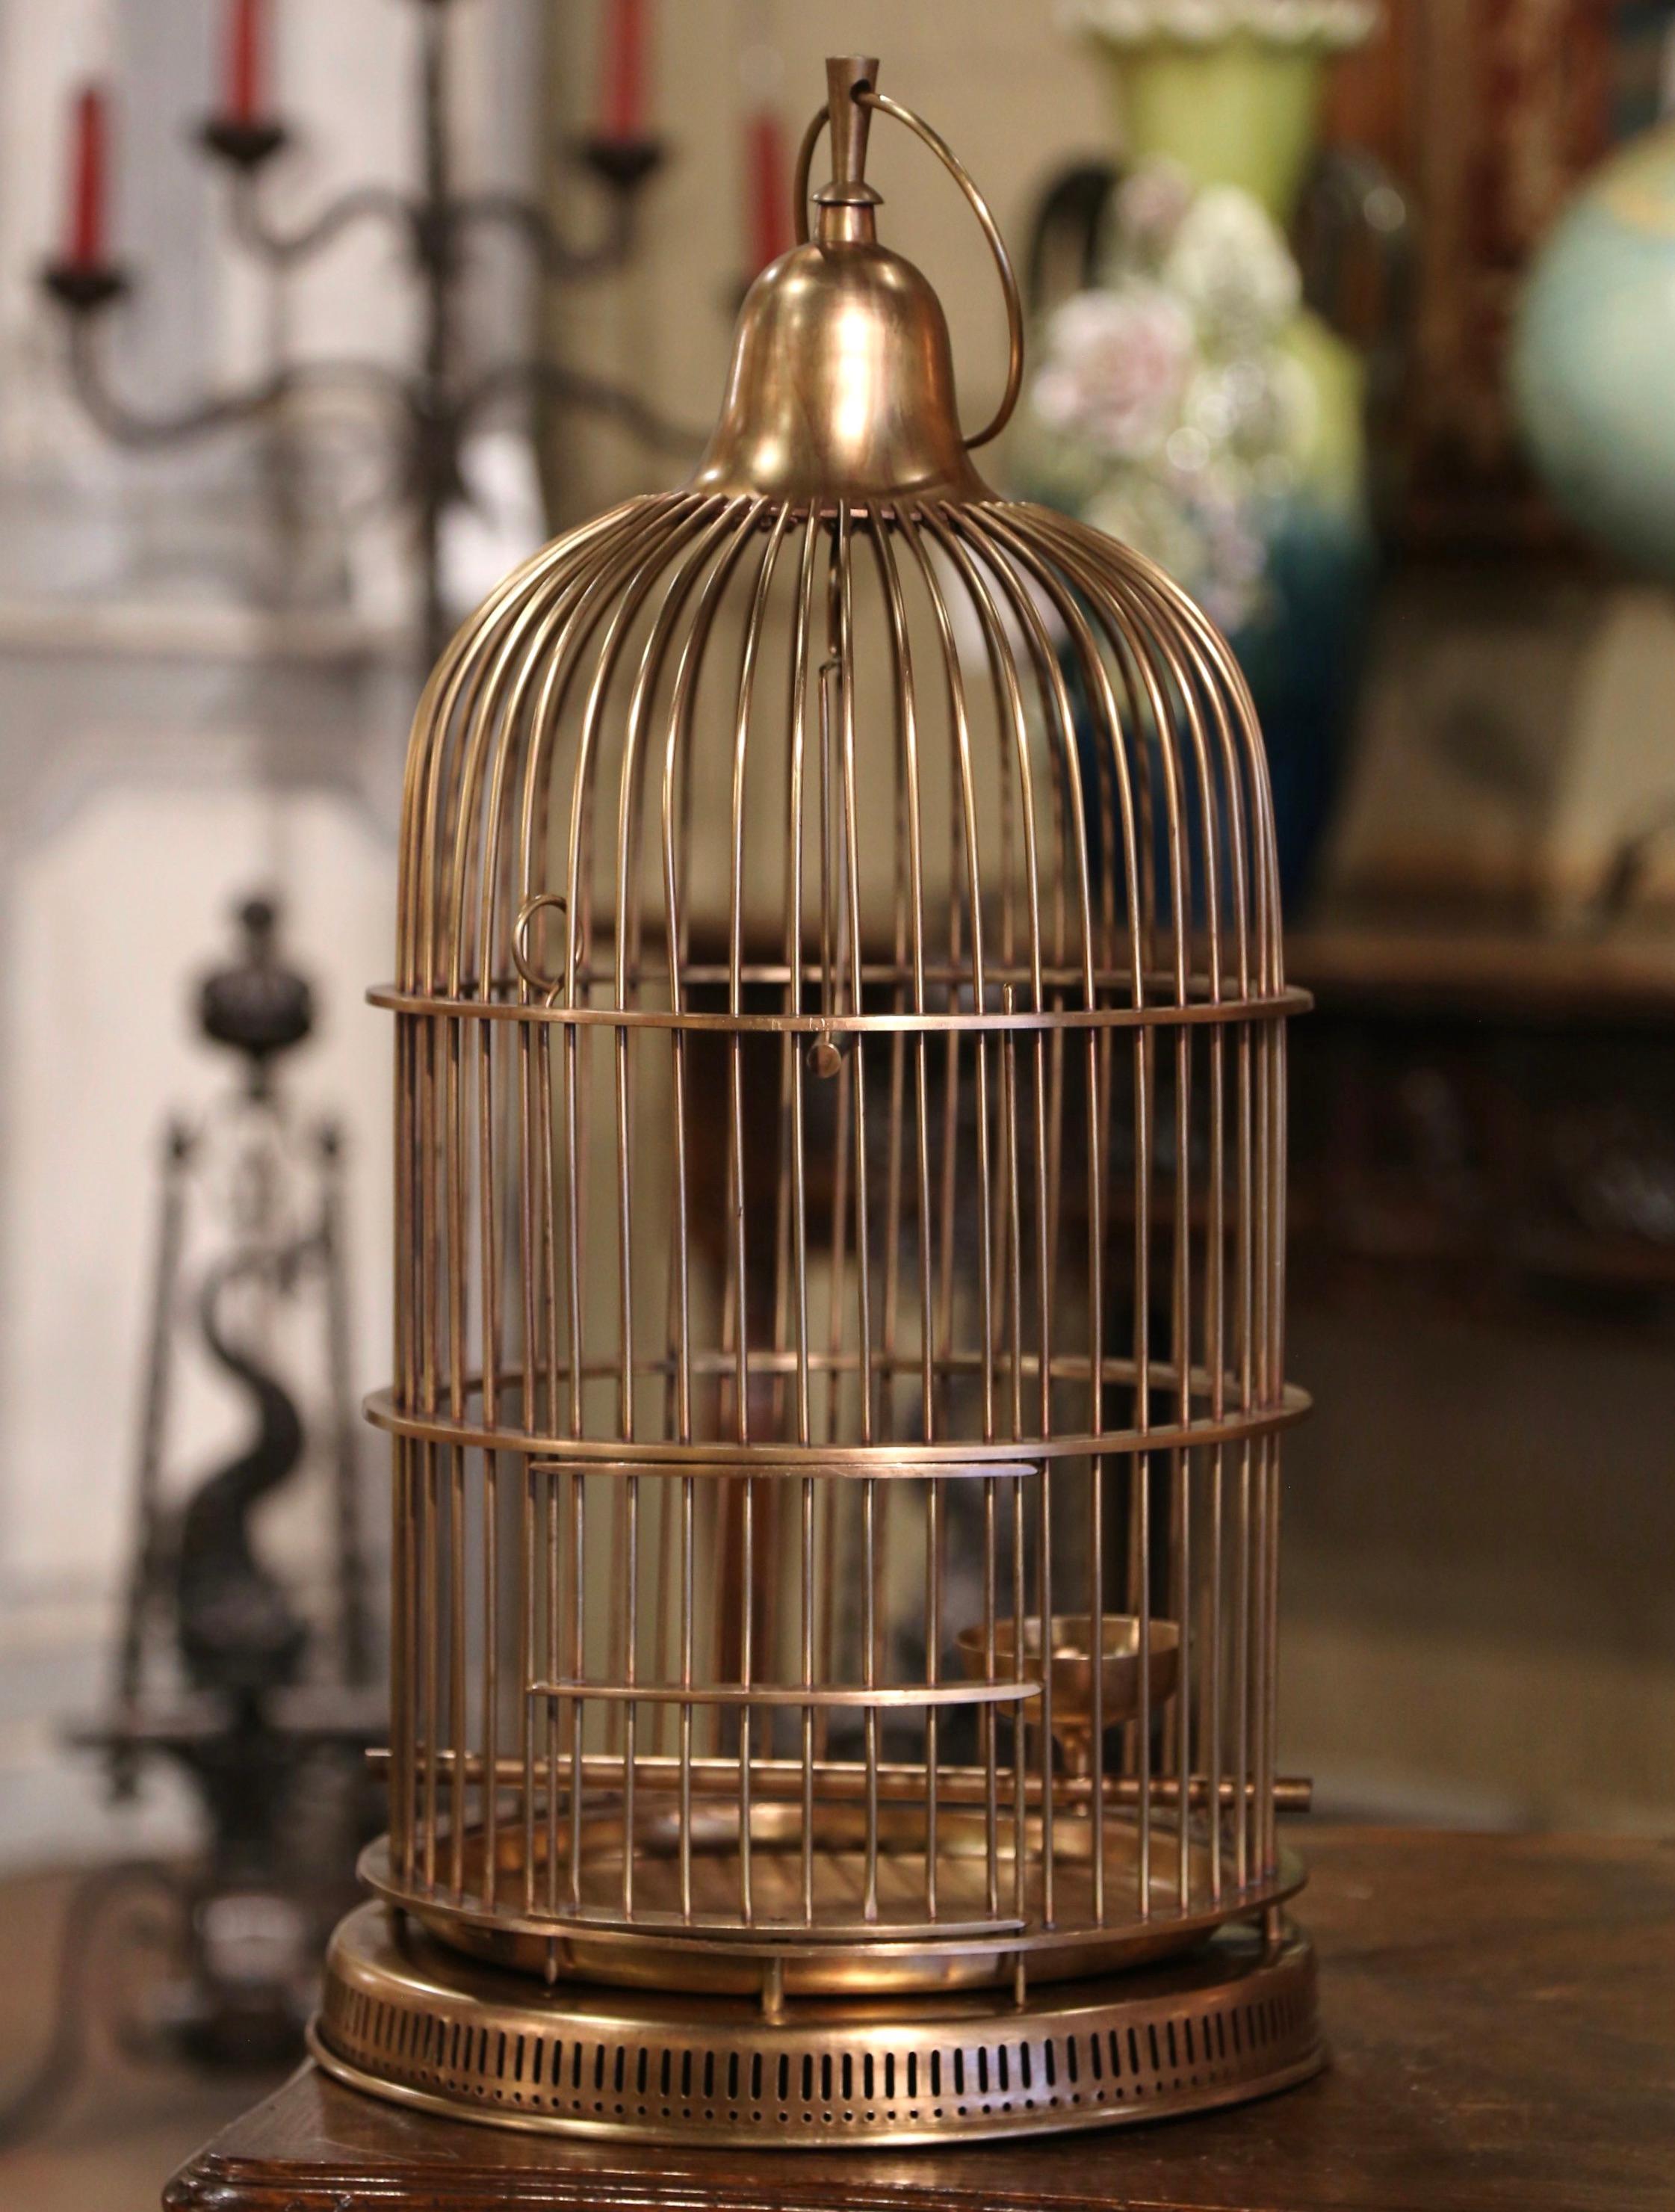 Decorate your home with this whimsical antique bird cage. Crafted in France, circa 1920, this cage made of brass, is cylindrical in shape and topped with a rounded dome embellished with a decorative hanging hook. The cage features one bowl feeding